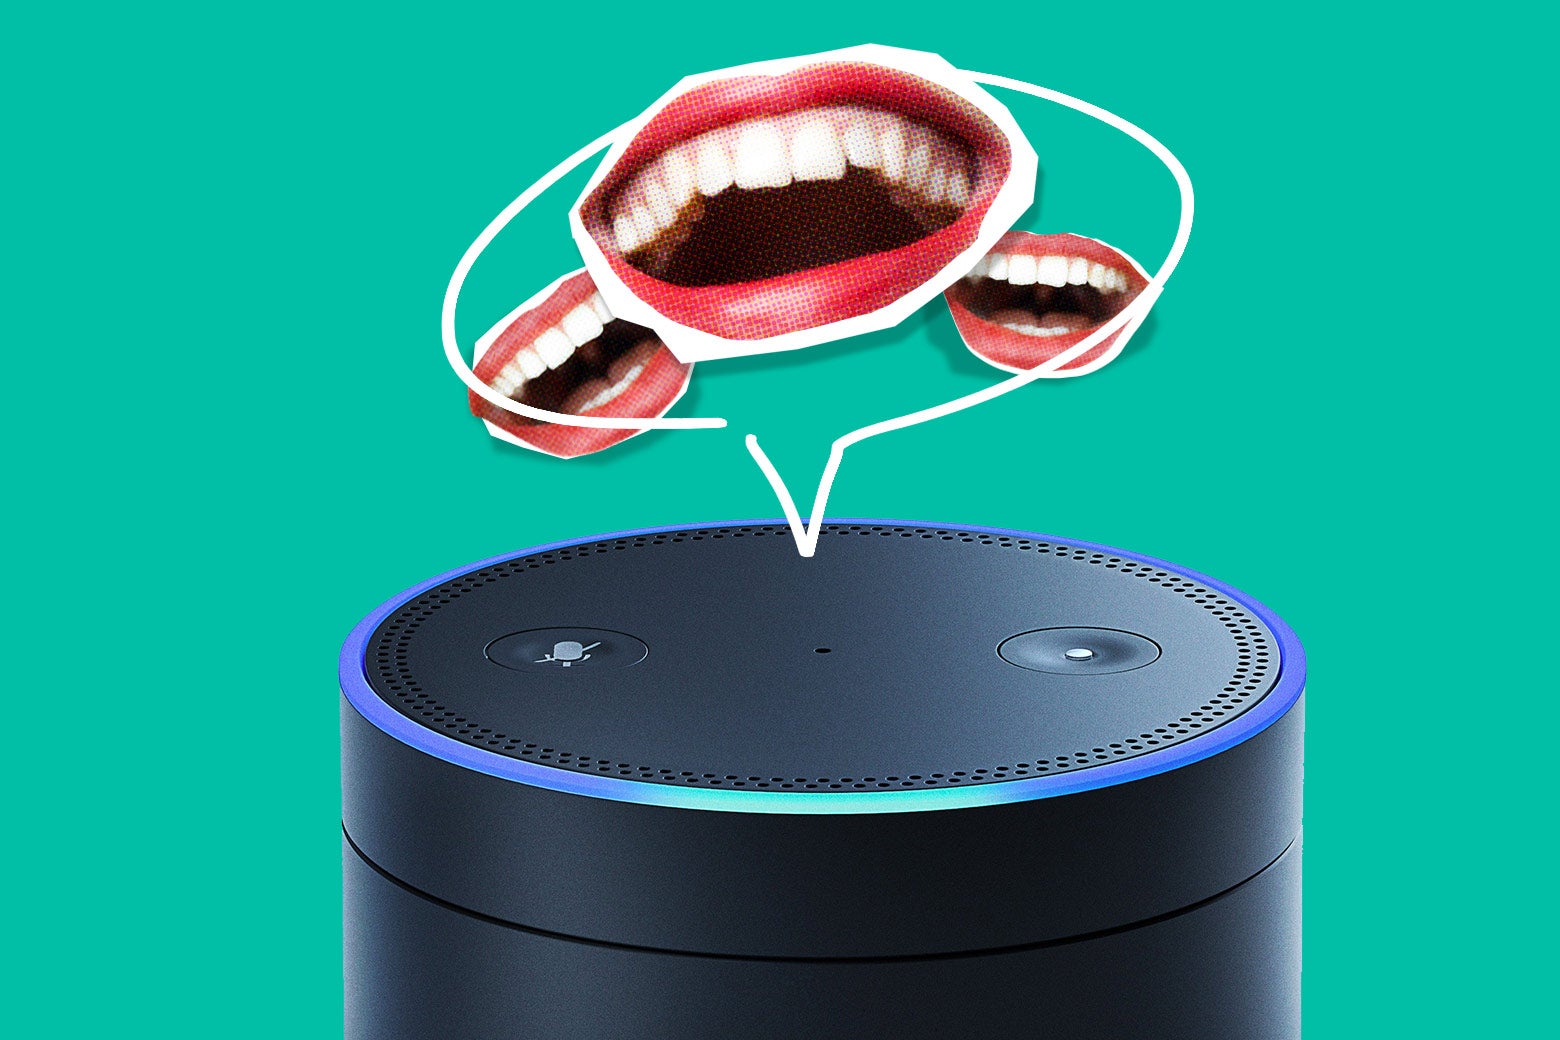 Photo illustration: an Amazon Echo device with a drawn-in speech bubble depicting laughter.